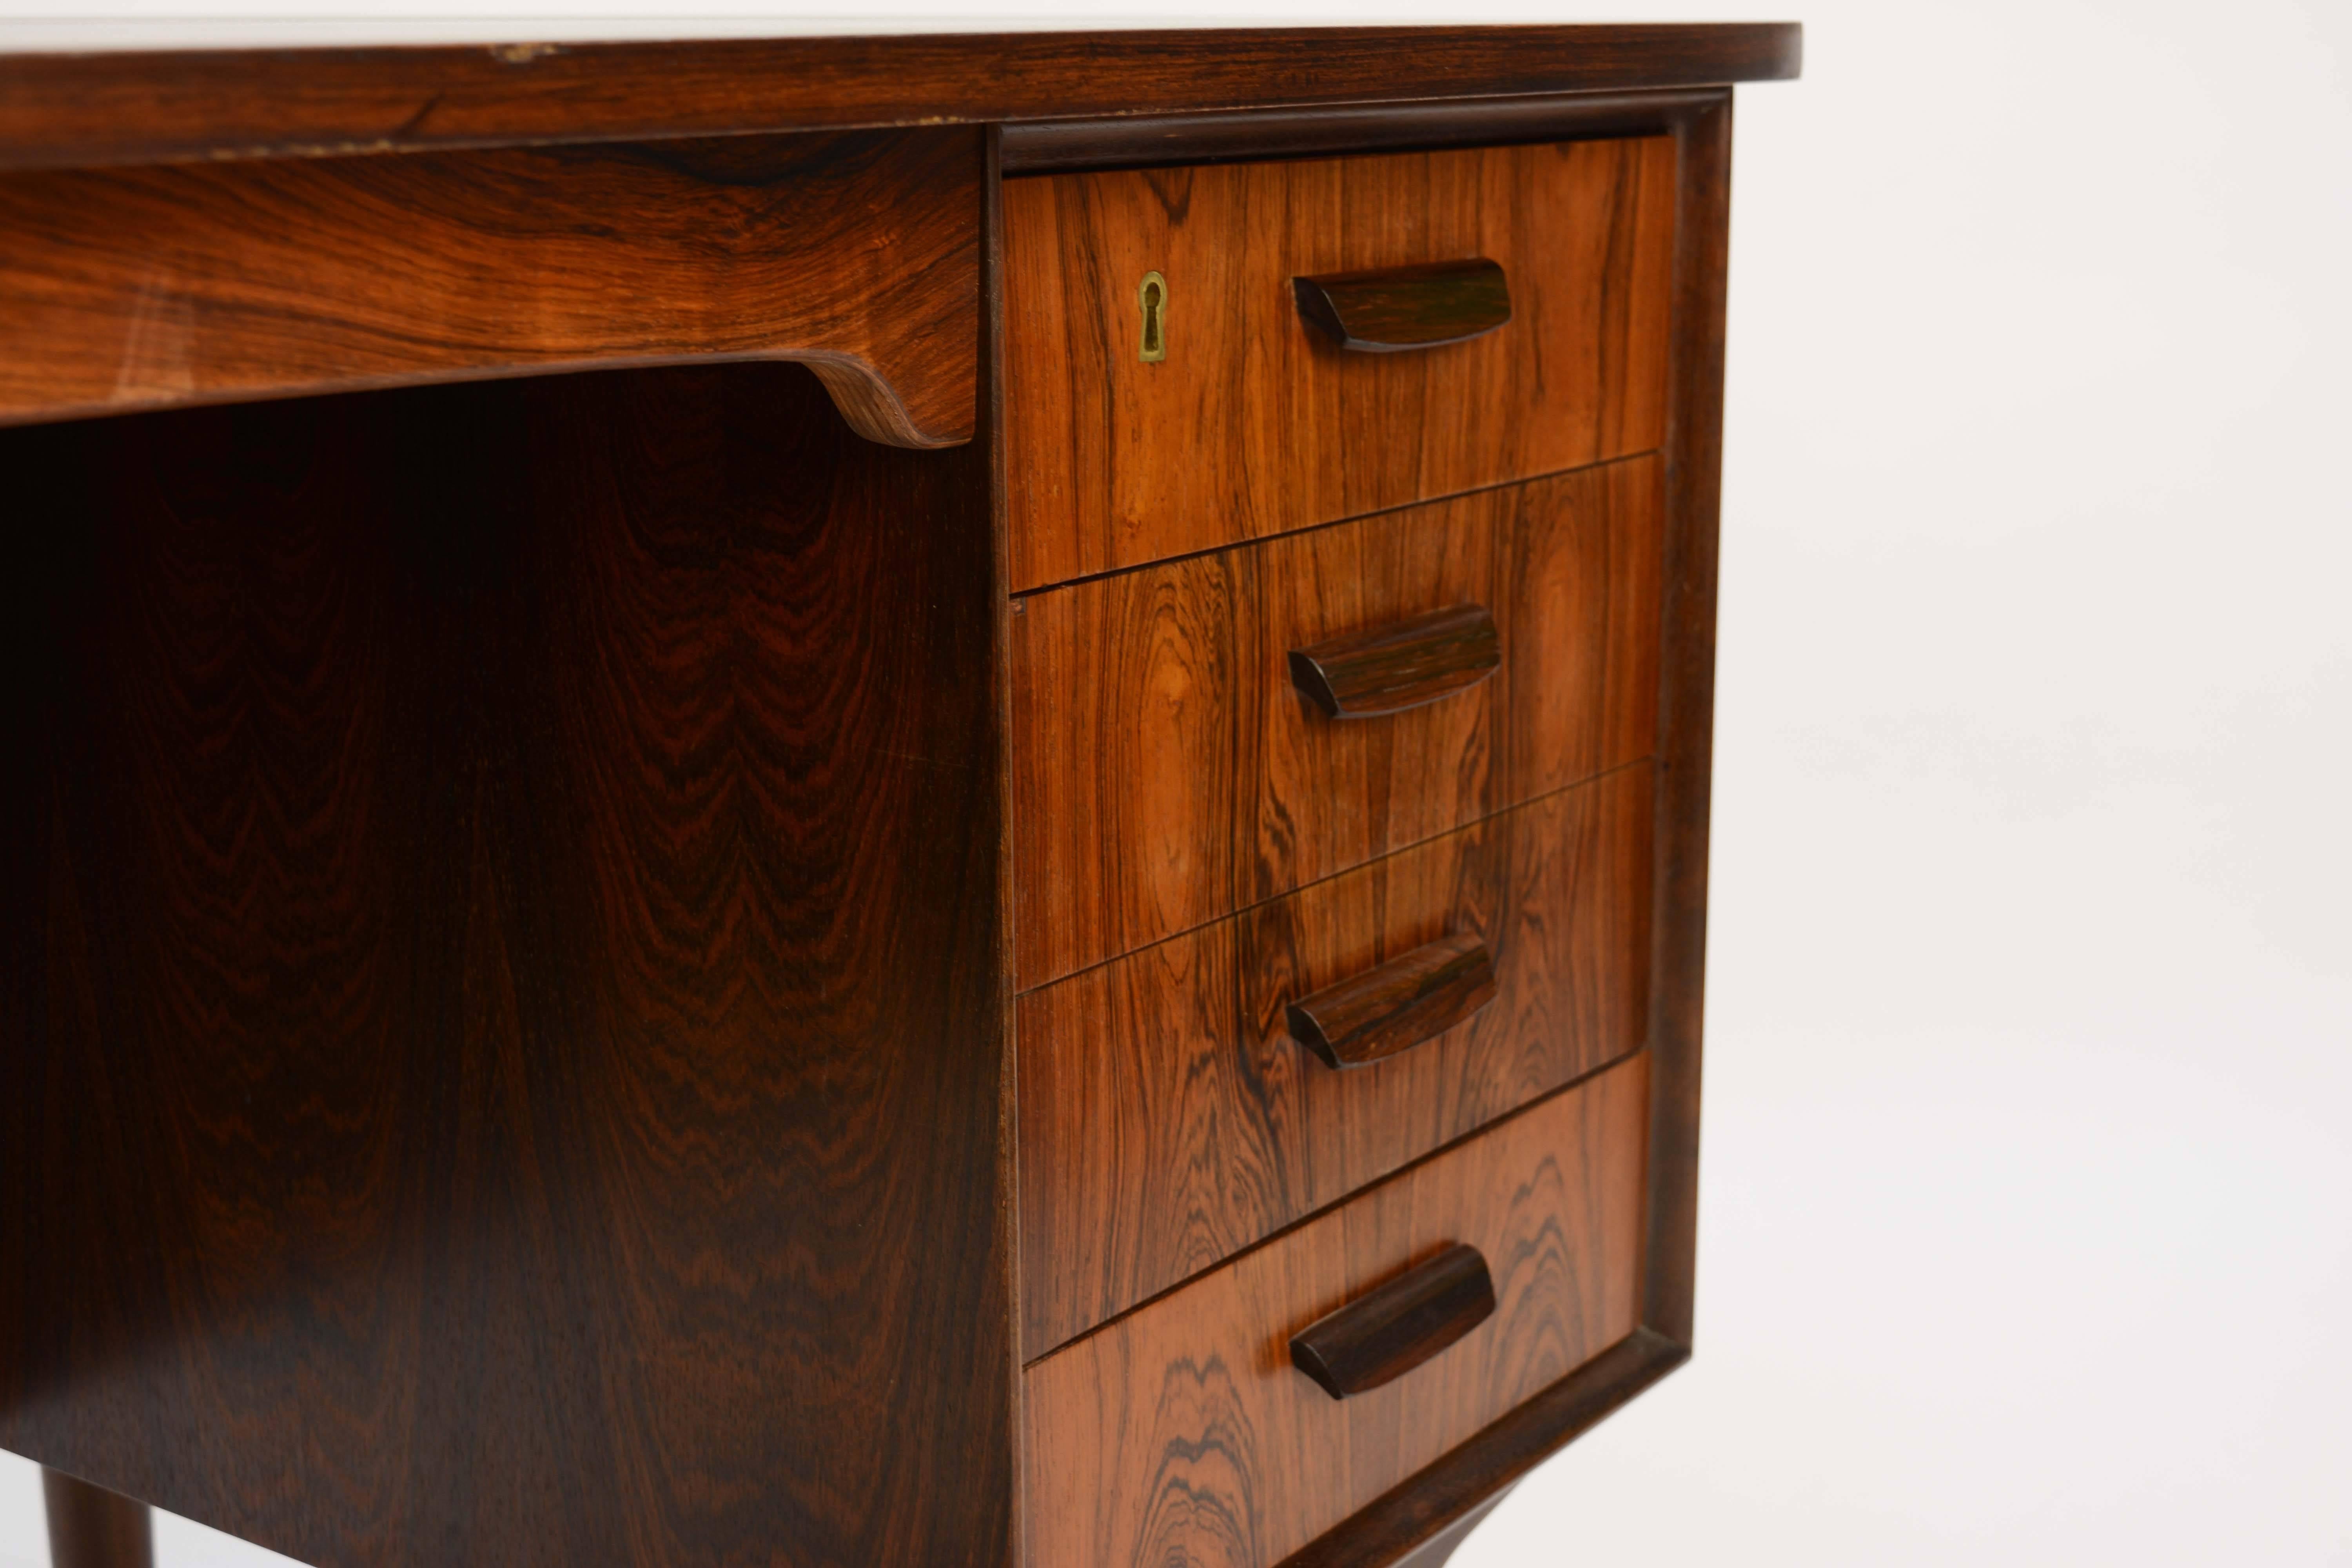 Magnificent and Sensual Kai Kristensen Rosewood Executive Desk from Denmark 2